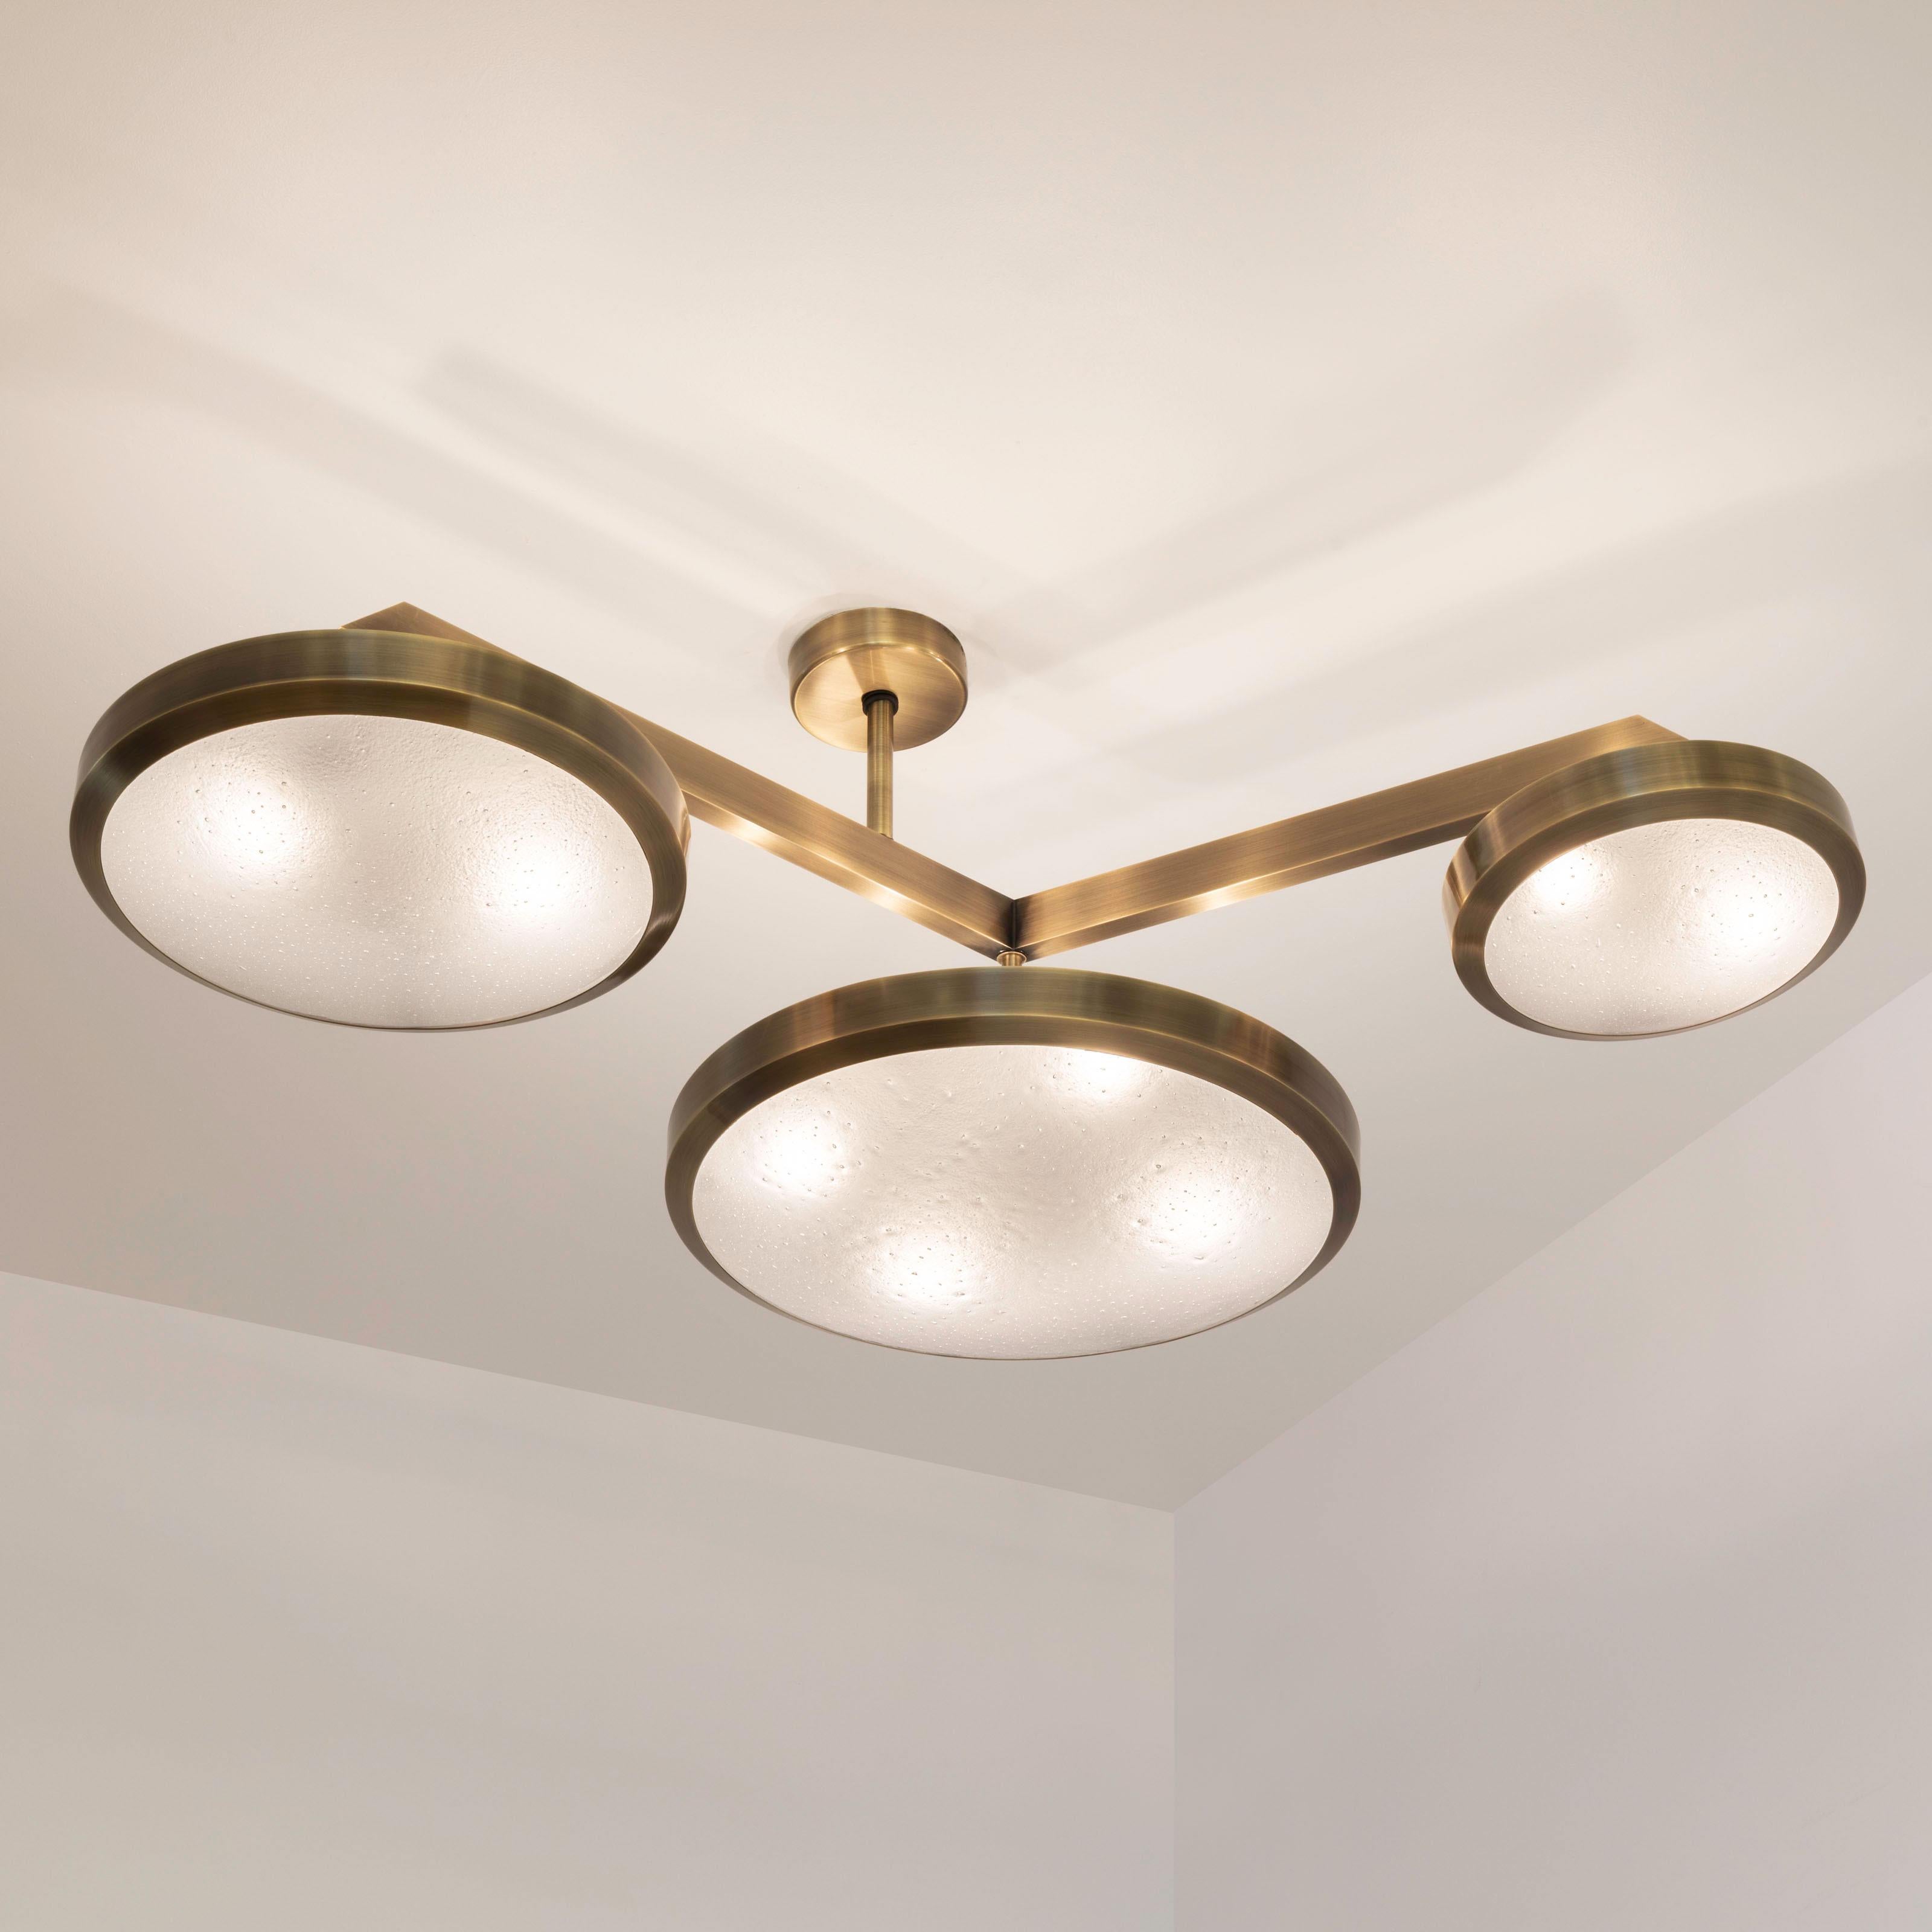 Contemporary Zeta Ceiling Light by Gaspare Asaro - Satin Brass Finish For Sale